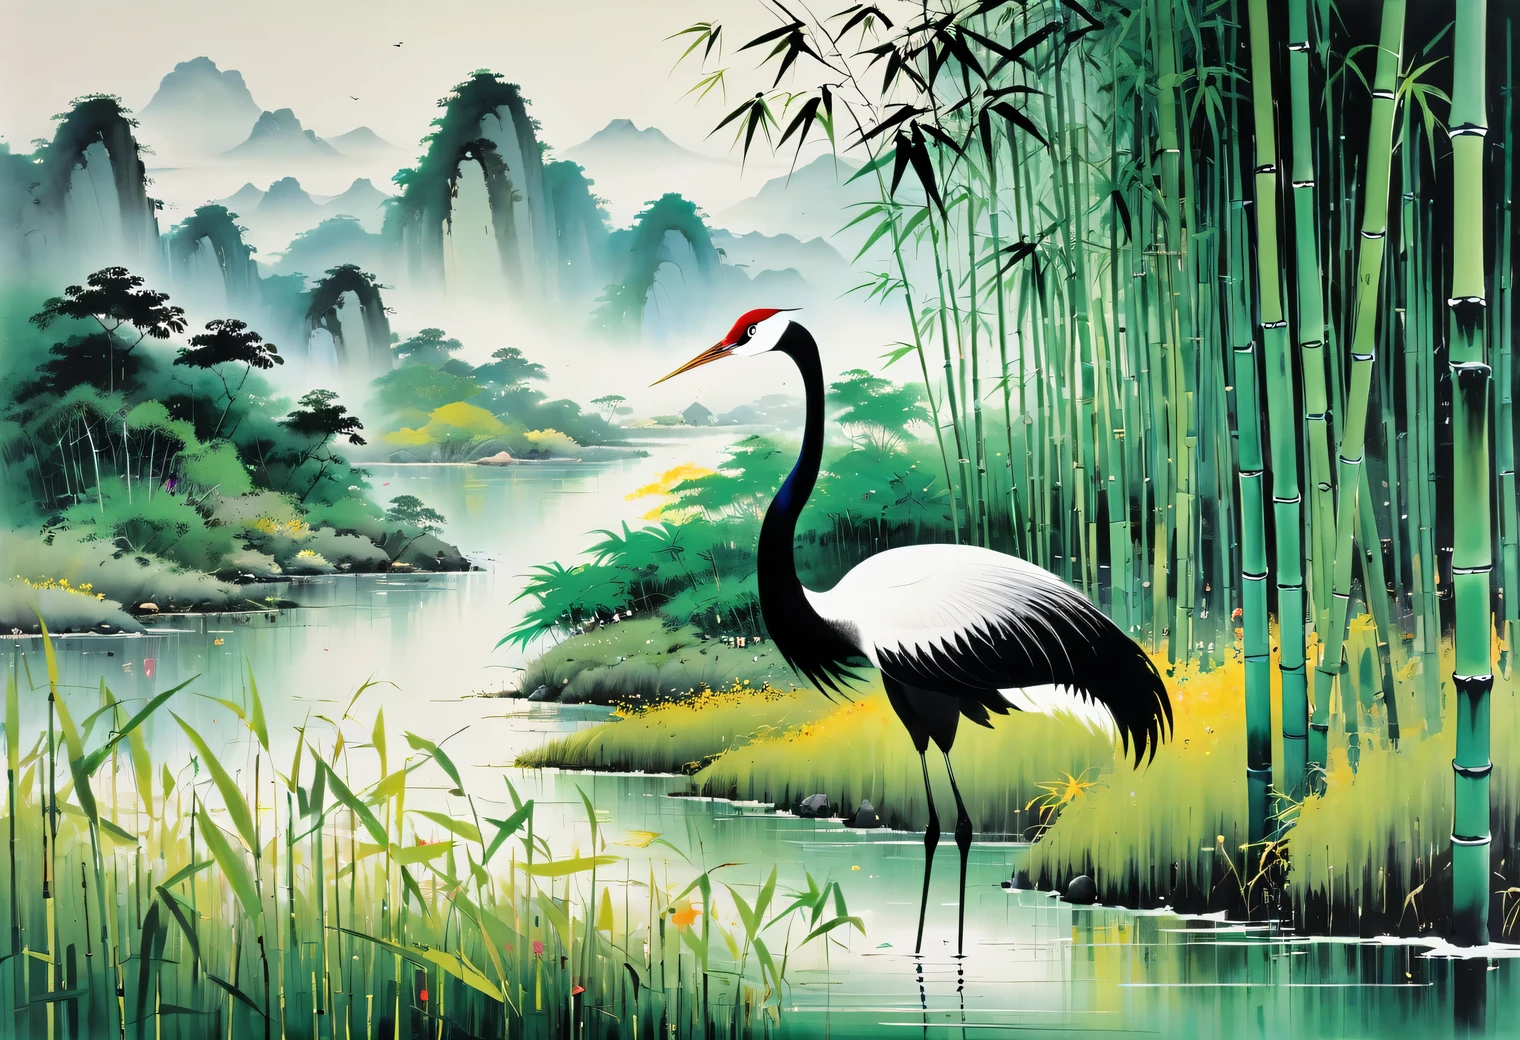 Wu Guanzhong paints a picture, the painting depicts a crane, dancing in the bamboo thickets, full compliance with the style of Wu Guanzhong, combining traditional Chinese ink painting techniques with Western painting concepts, unique visual effects using color and lines.